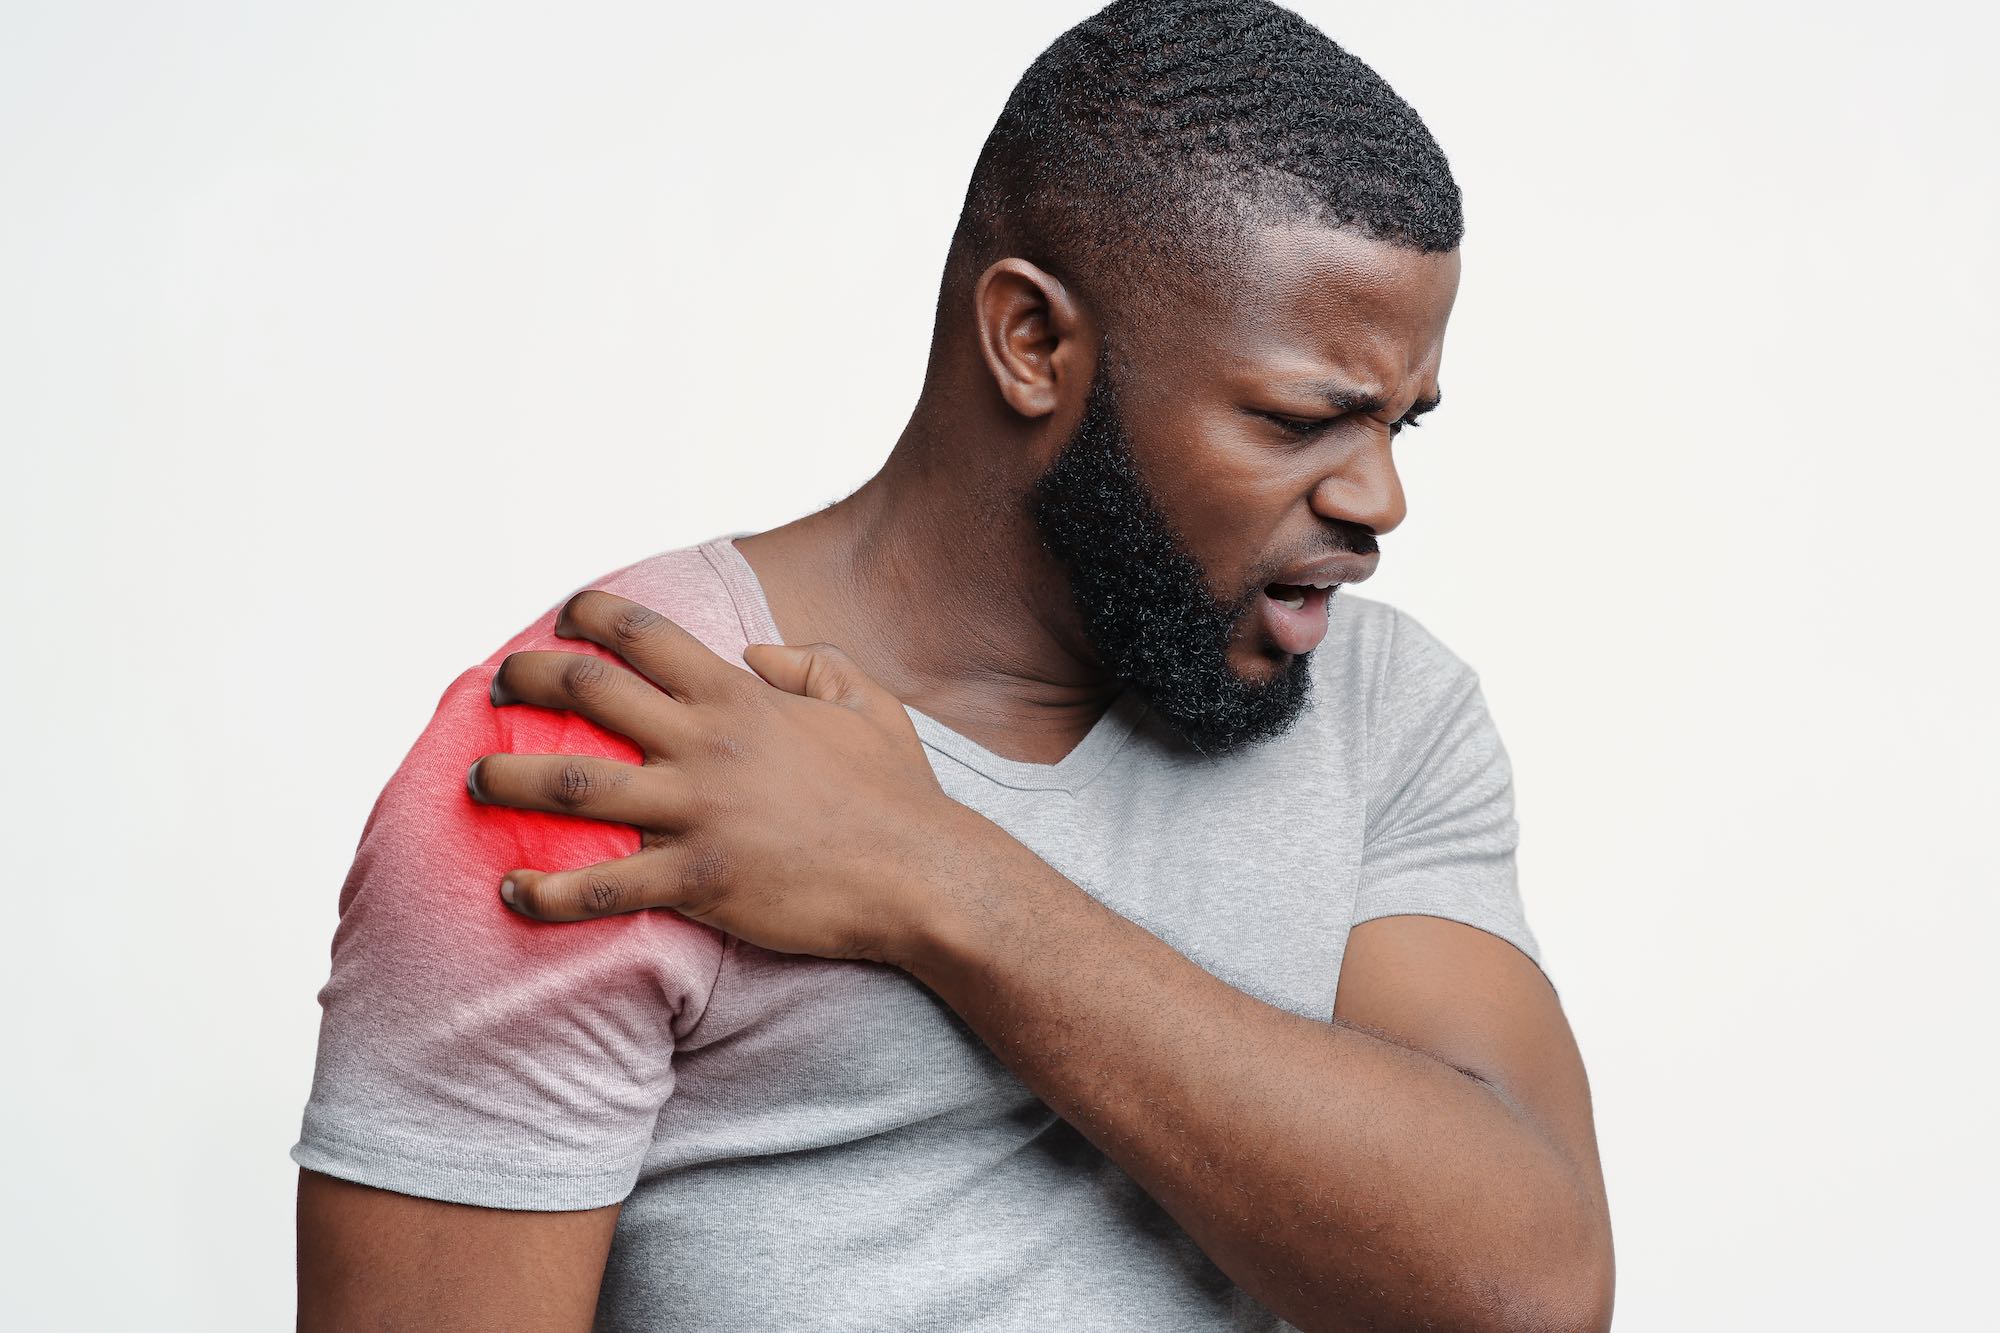 Does a Torn Rotator Cuff Hurt All the Time?